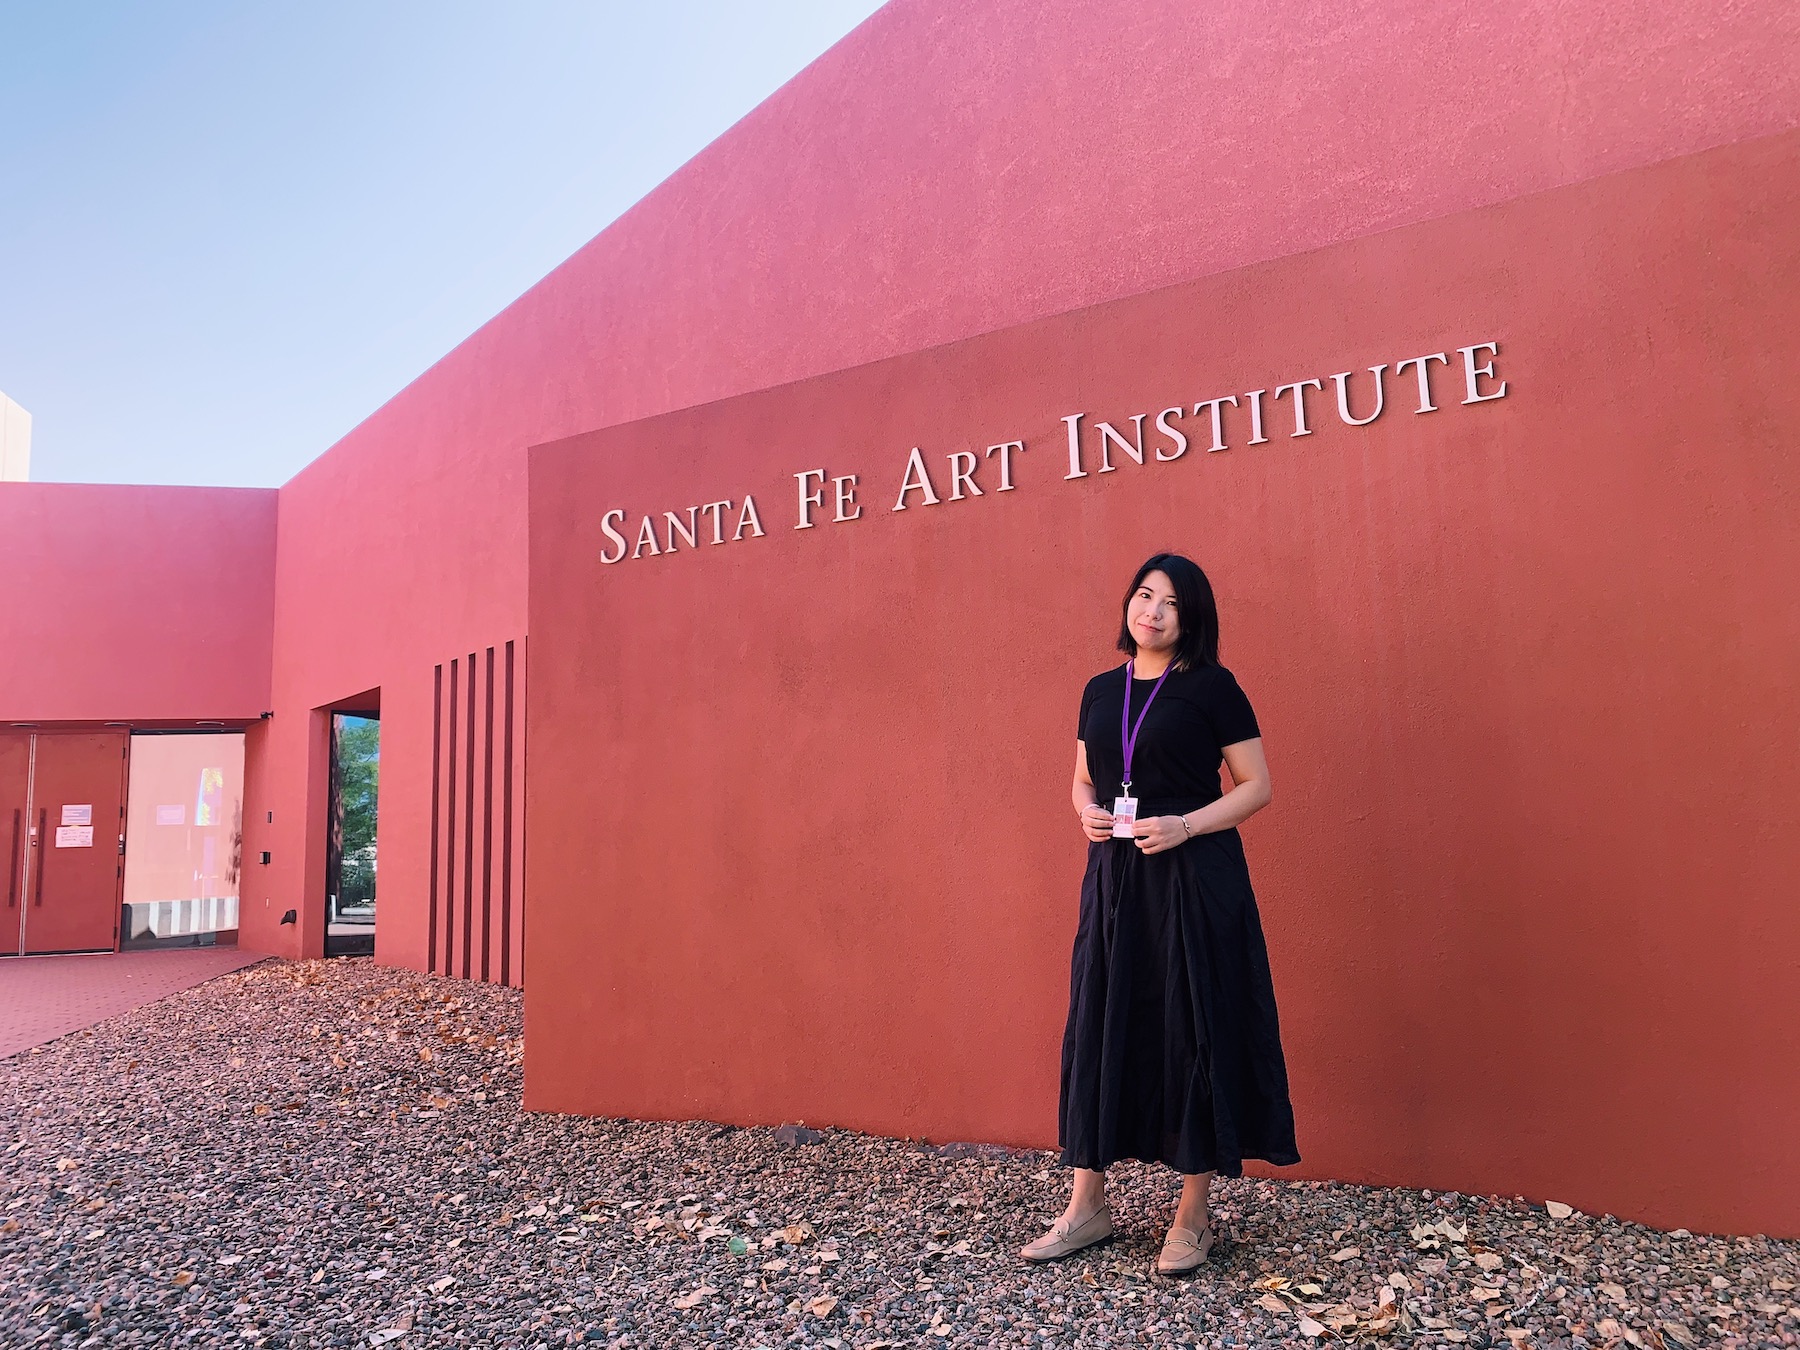 When I arrived at SFAI in early September, the summer was not over yet.